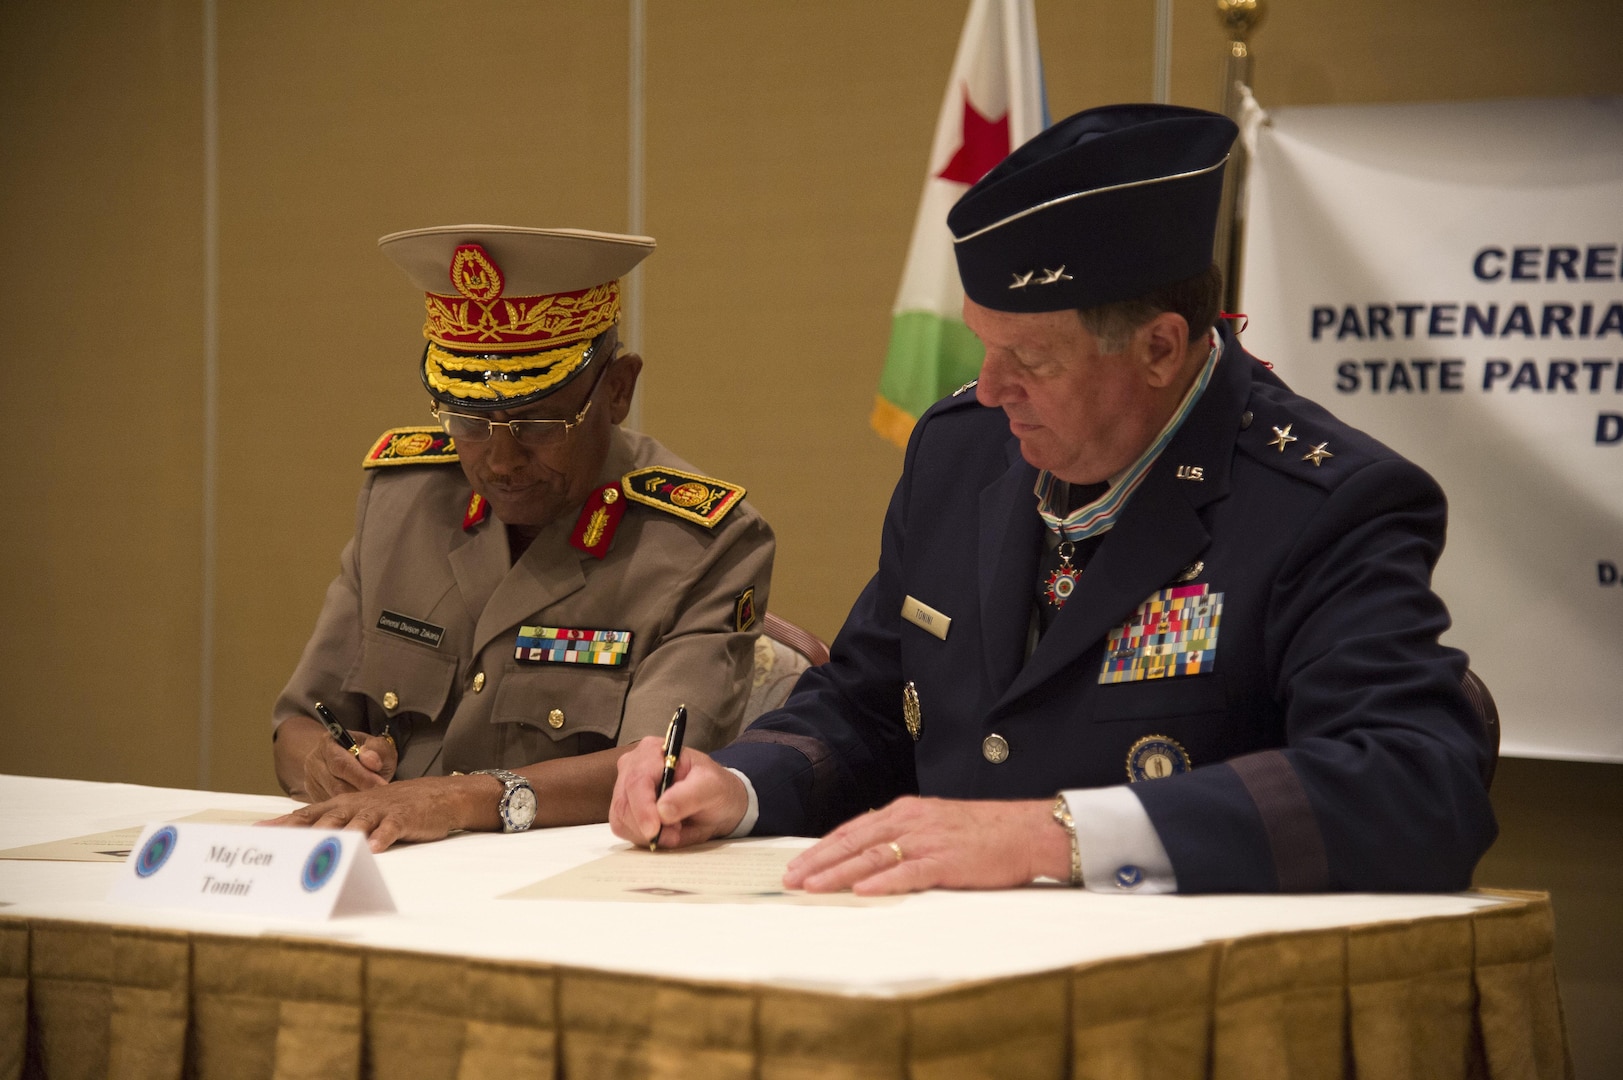 Maj. Gen. Zakaria Cheik Ibrahim, left, Djiboutian Armed Forces (FAD) chief of defense and Maj. Gen. Edward Tonini, Kentucky National Guard (KNG) adjutant general, sign a State Partnership Program agreement at the Kempinski Hotel, Djibouti, June 2, 2015. The agreement means a long-term cooperative agreement between the KNG and FAD that will foster mutually beneficial exchanges between the two at all levels of the military as well as the civilian world. 